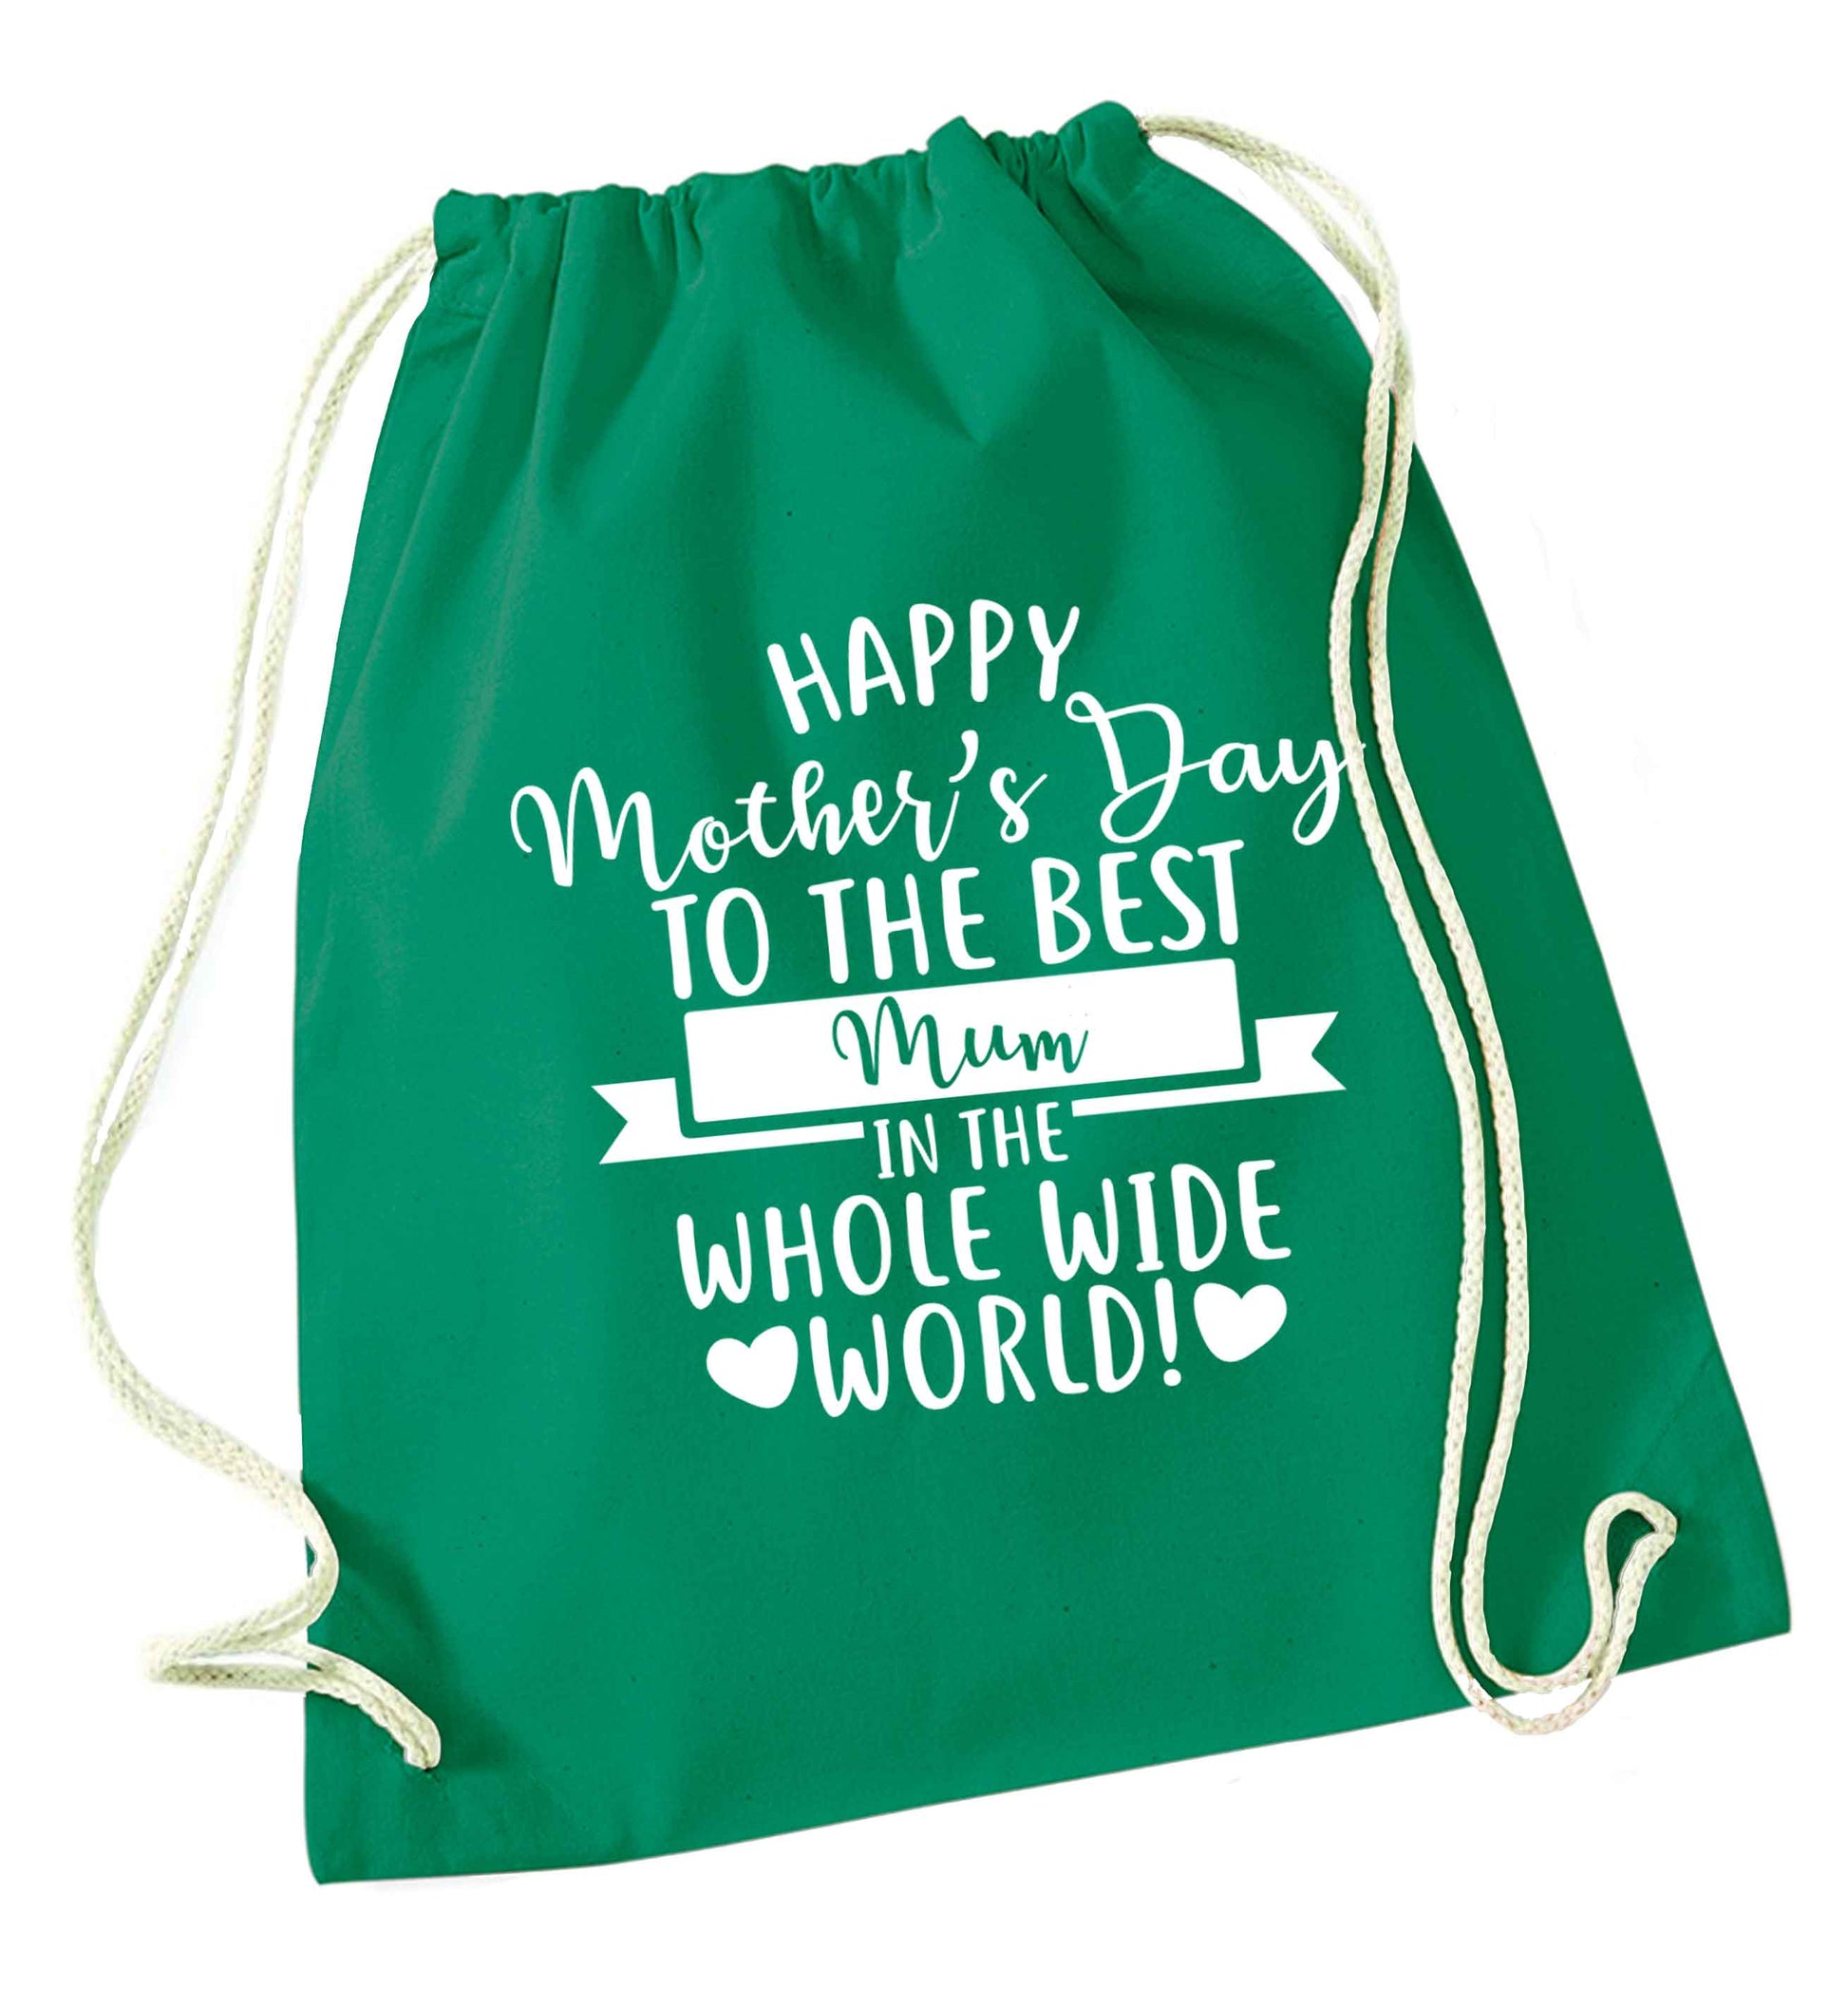 Happy mother's day to the best mum in the world green drawstring bag